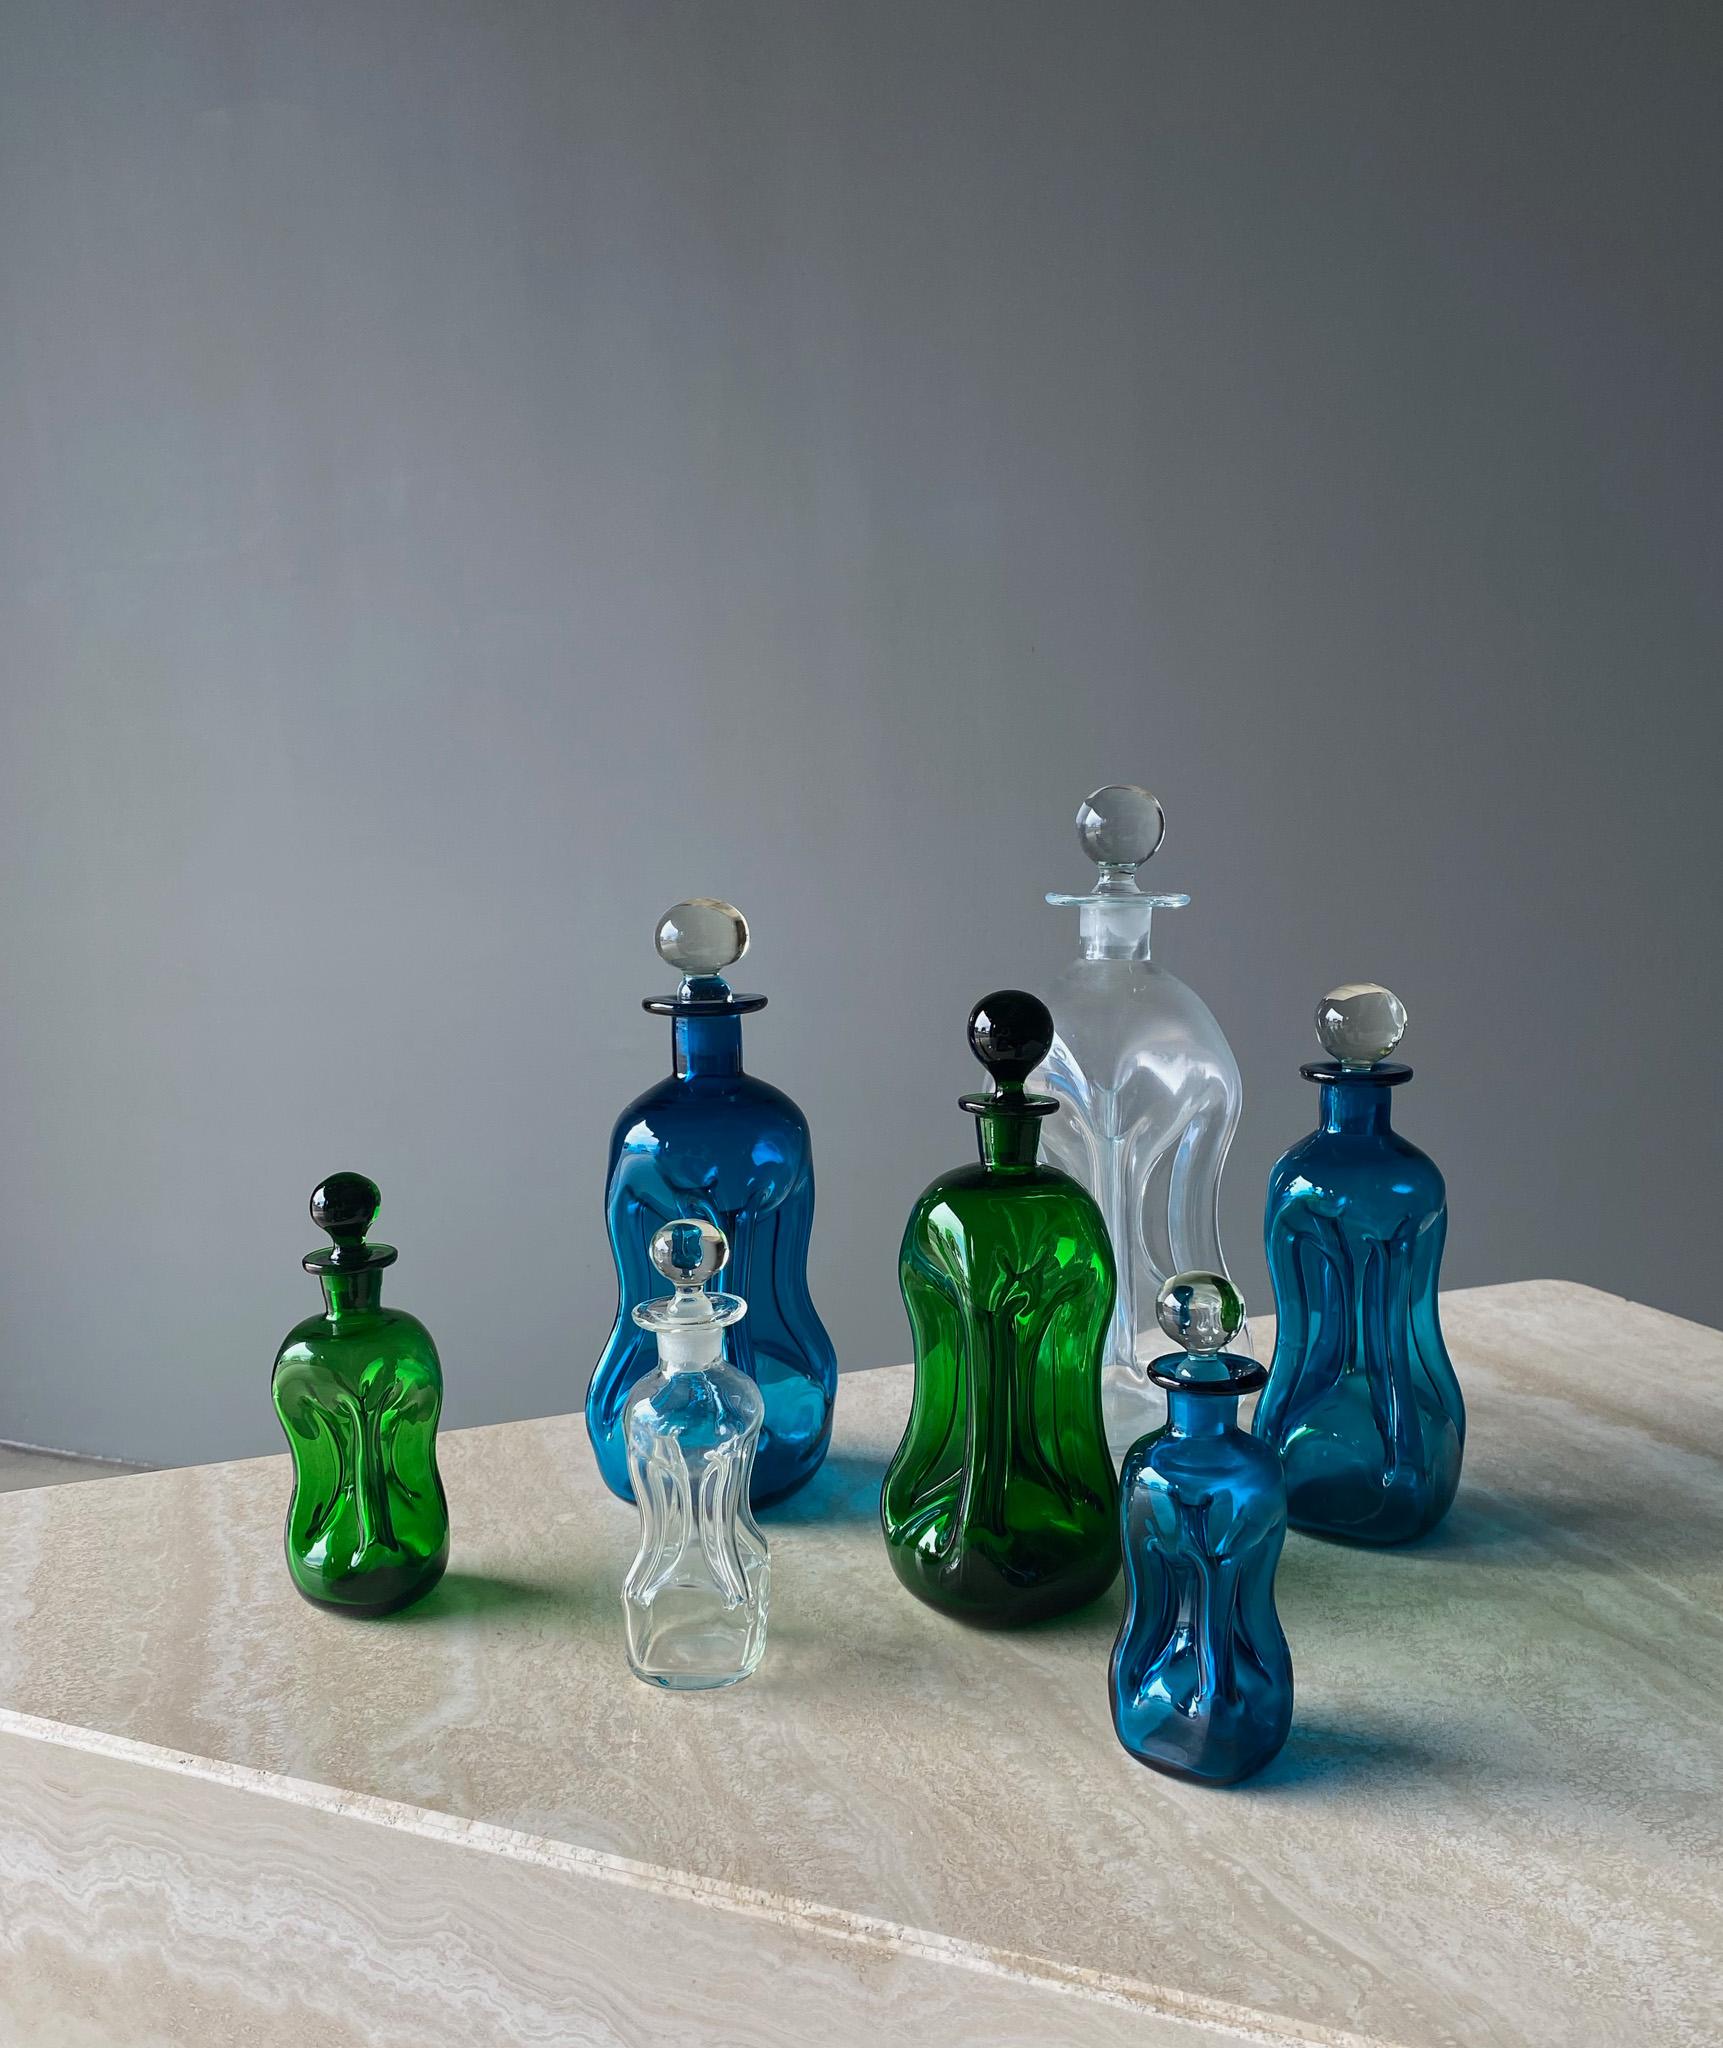 Set of Seven Art Glass Decanters by Holmegaard, Denmark, 1960s. 

Dimensions of the individual decanters are listed from largest to smallest.

1. 5 1/4'' wide by 5 1/4'' deep by 11'' tall.
2. 3 1/4'' wide by 3 1/4'' deep by 9 1/2'' tall
3. 3''